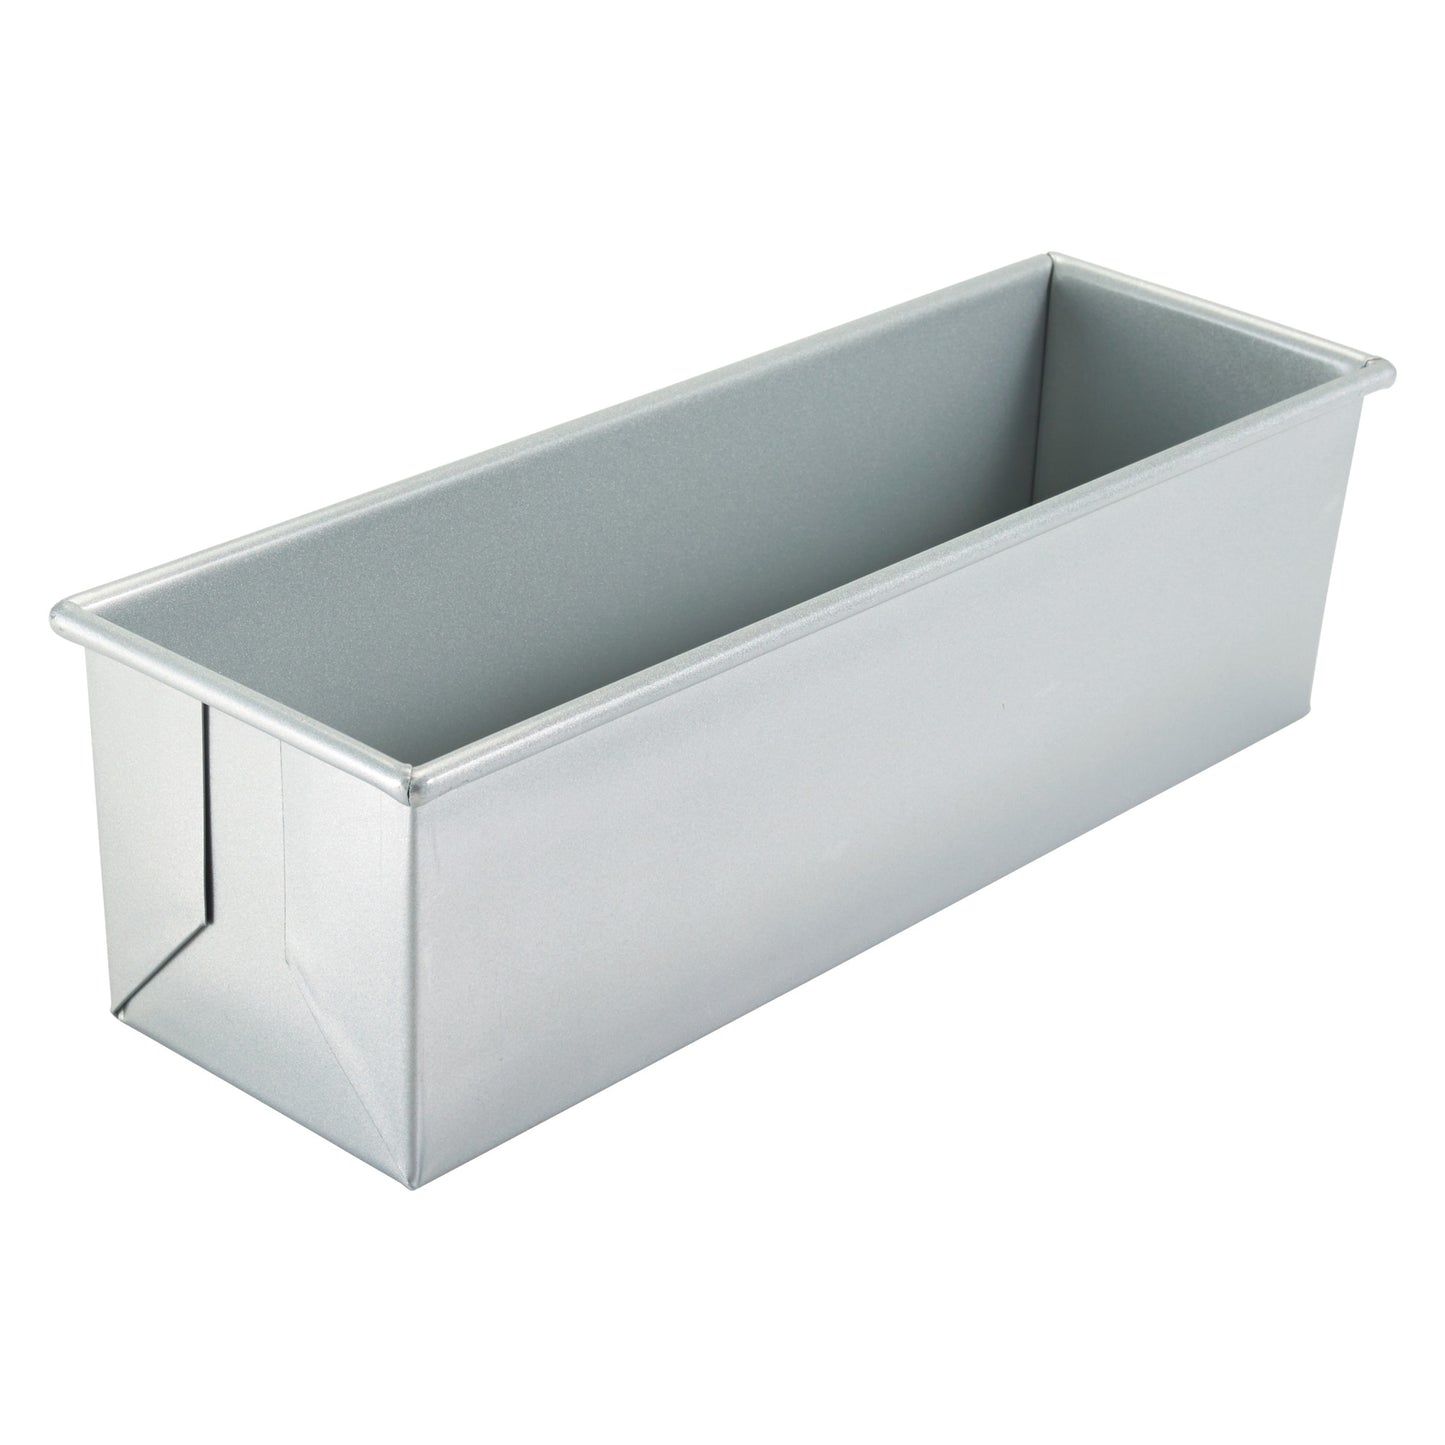 HPP-15 - Aluminized Steel Pullman Pans with Silicone Glaze - 1-1/2 lb